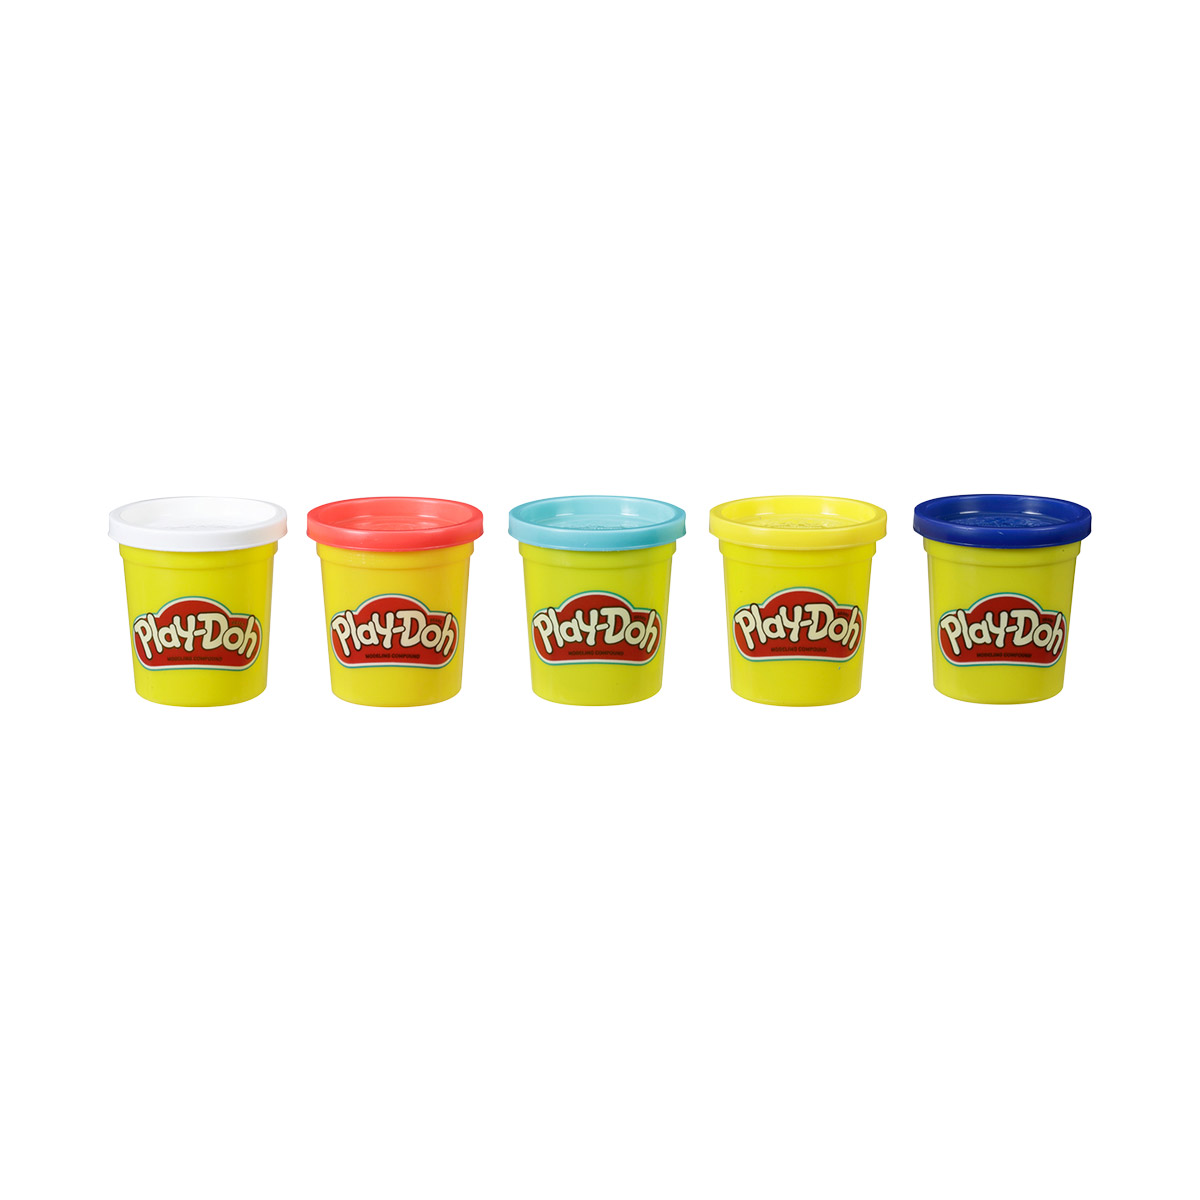 Play-Doh Zoo Mini Color 4-Pack of Modeling Compound with Glitter and  Metallic Colors, 1-Ounce Cans, Non-Toxic - Play-Doh